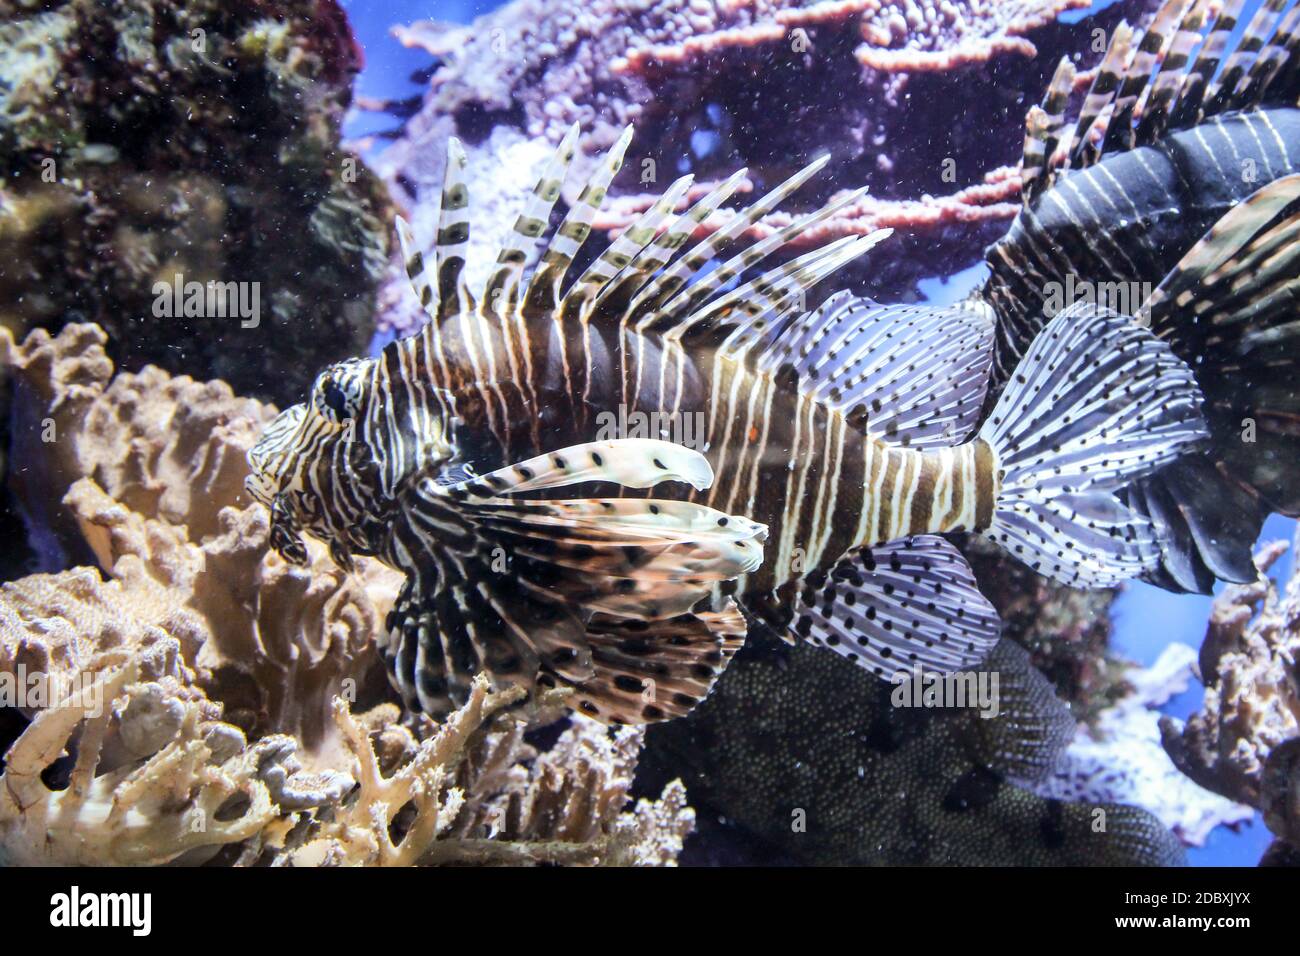 A dangerous lionfish on a reef. Stock Photo